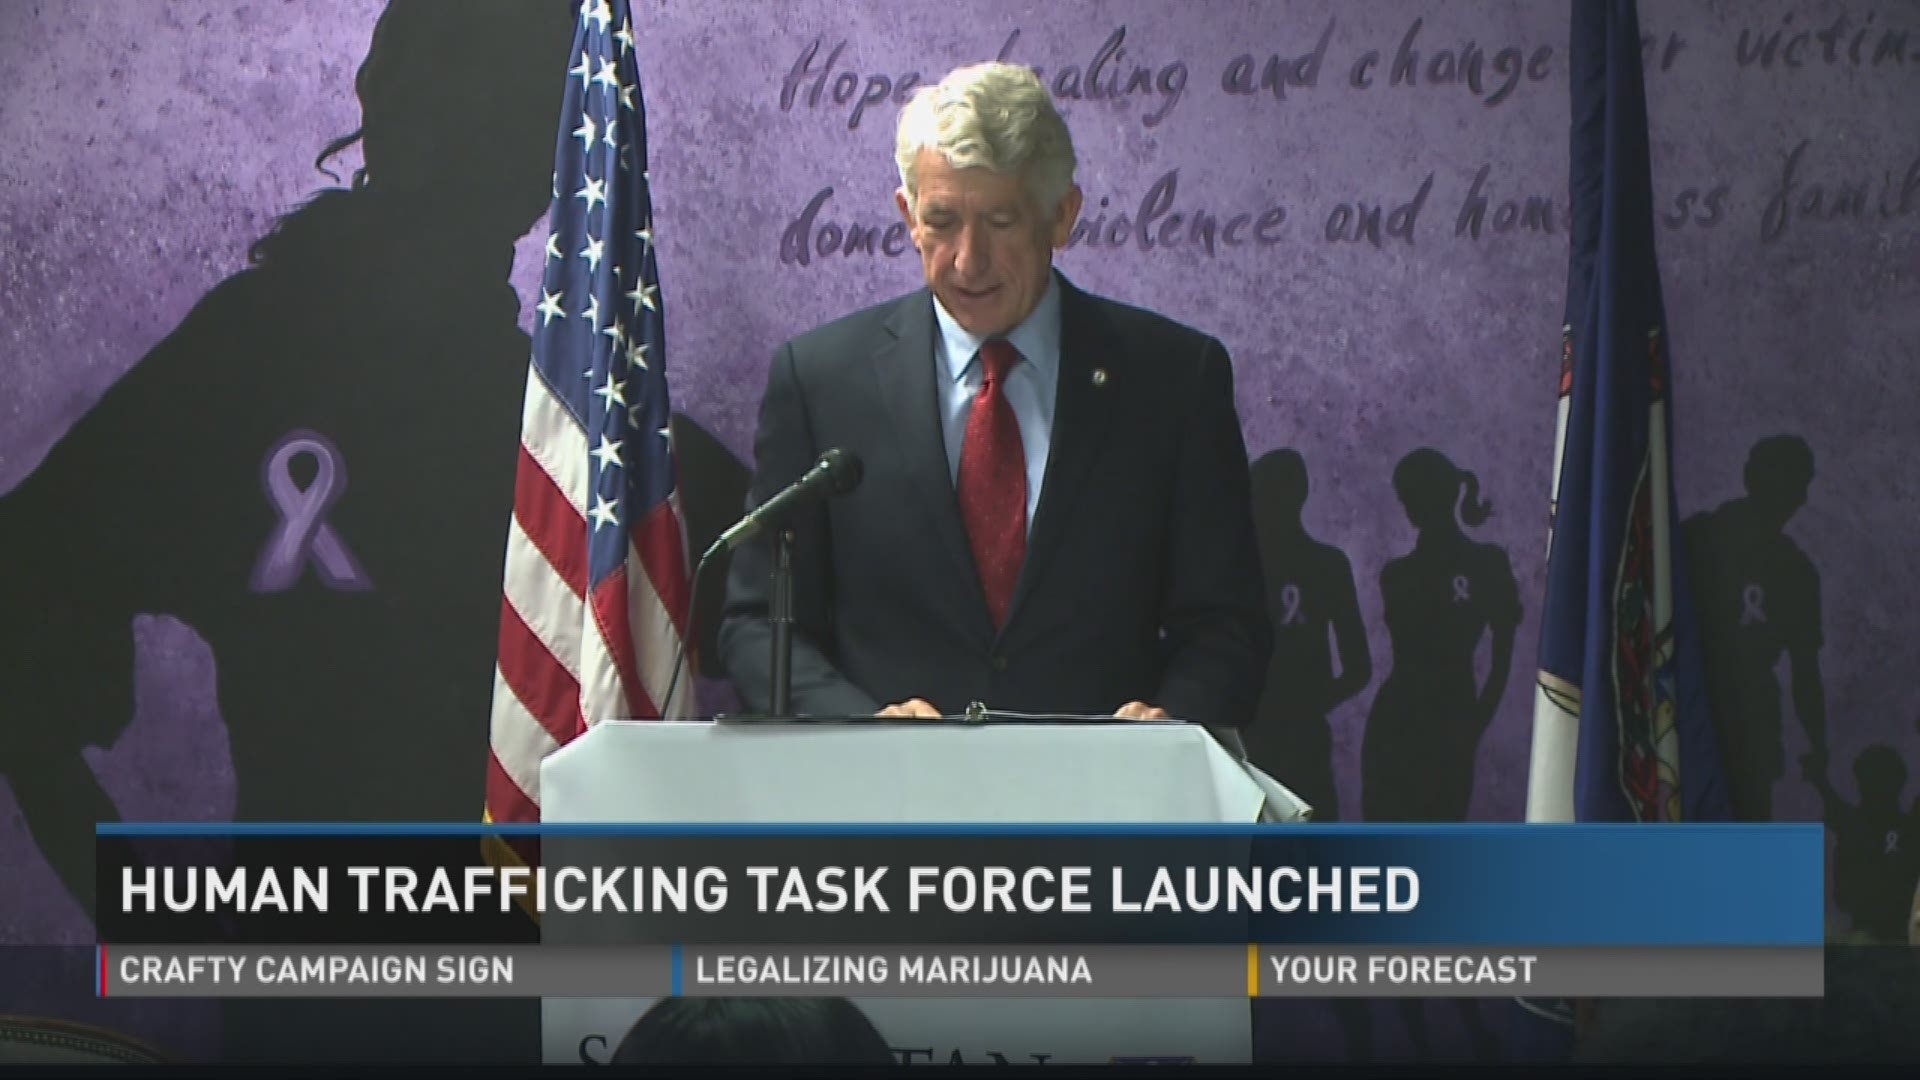 Human trafficking task force launched